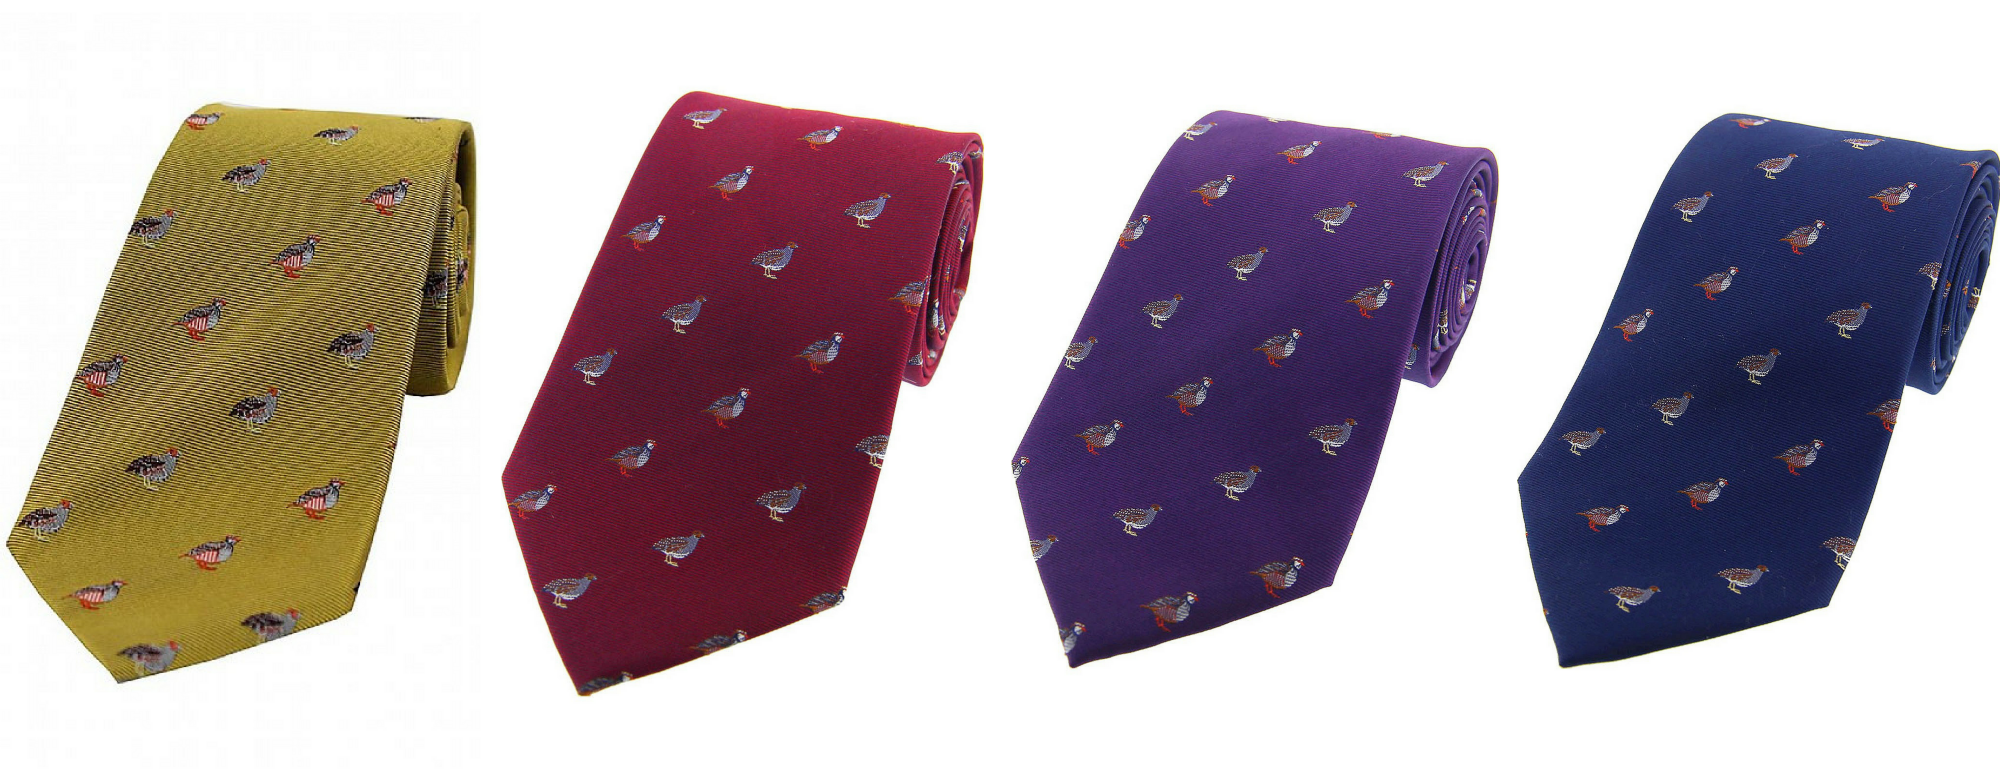 silk partridge ties in yellow, red, purple and navy